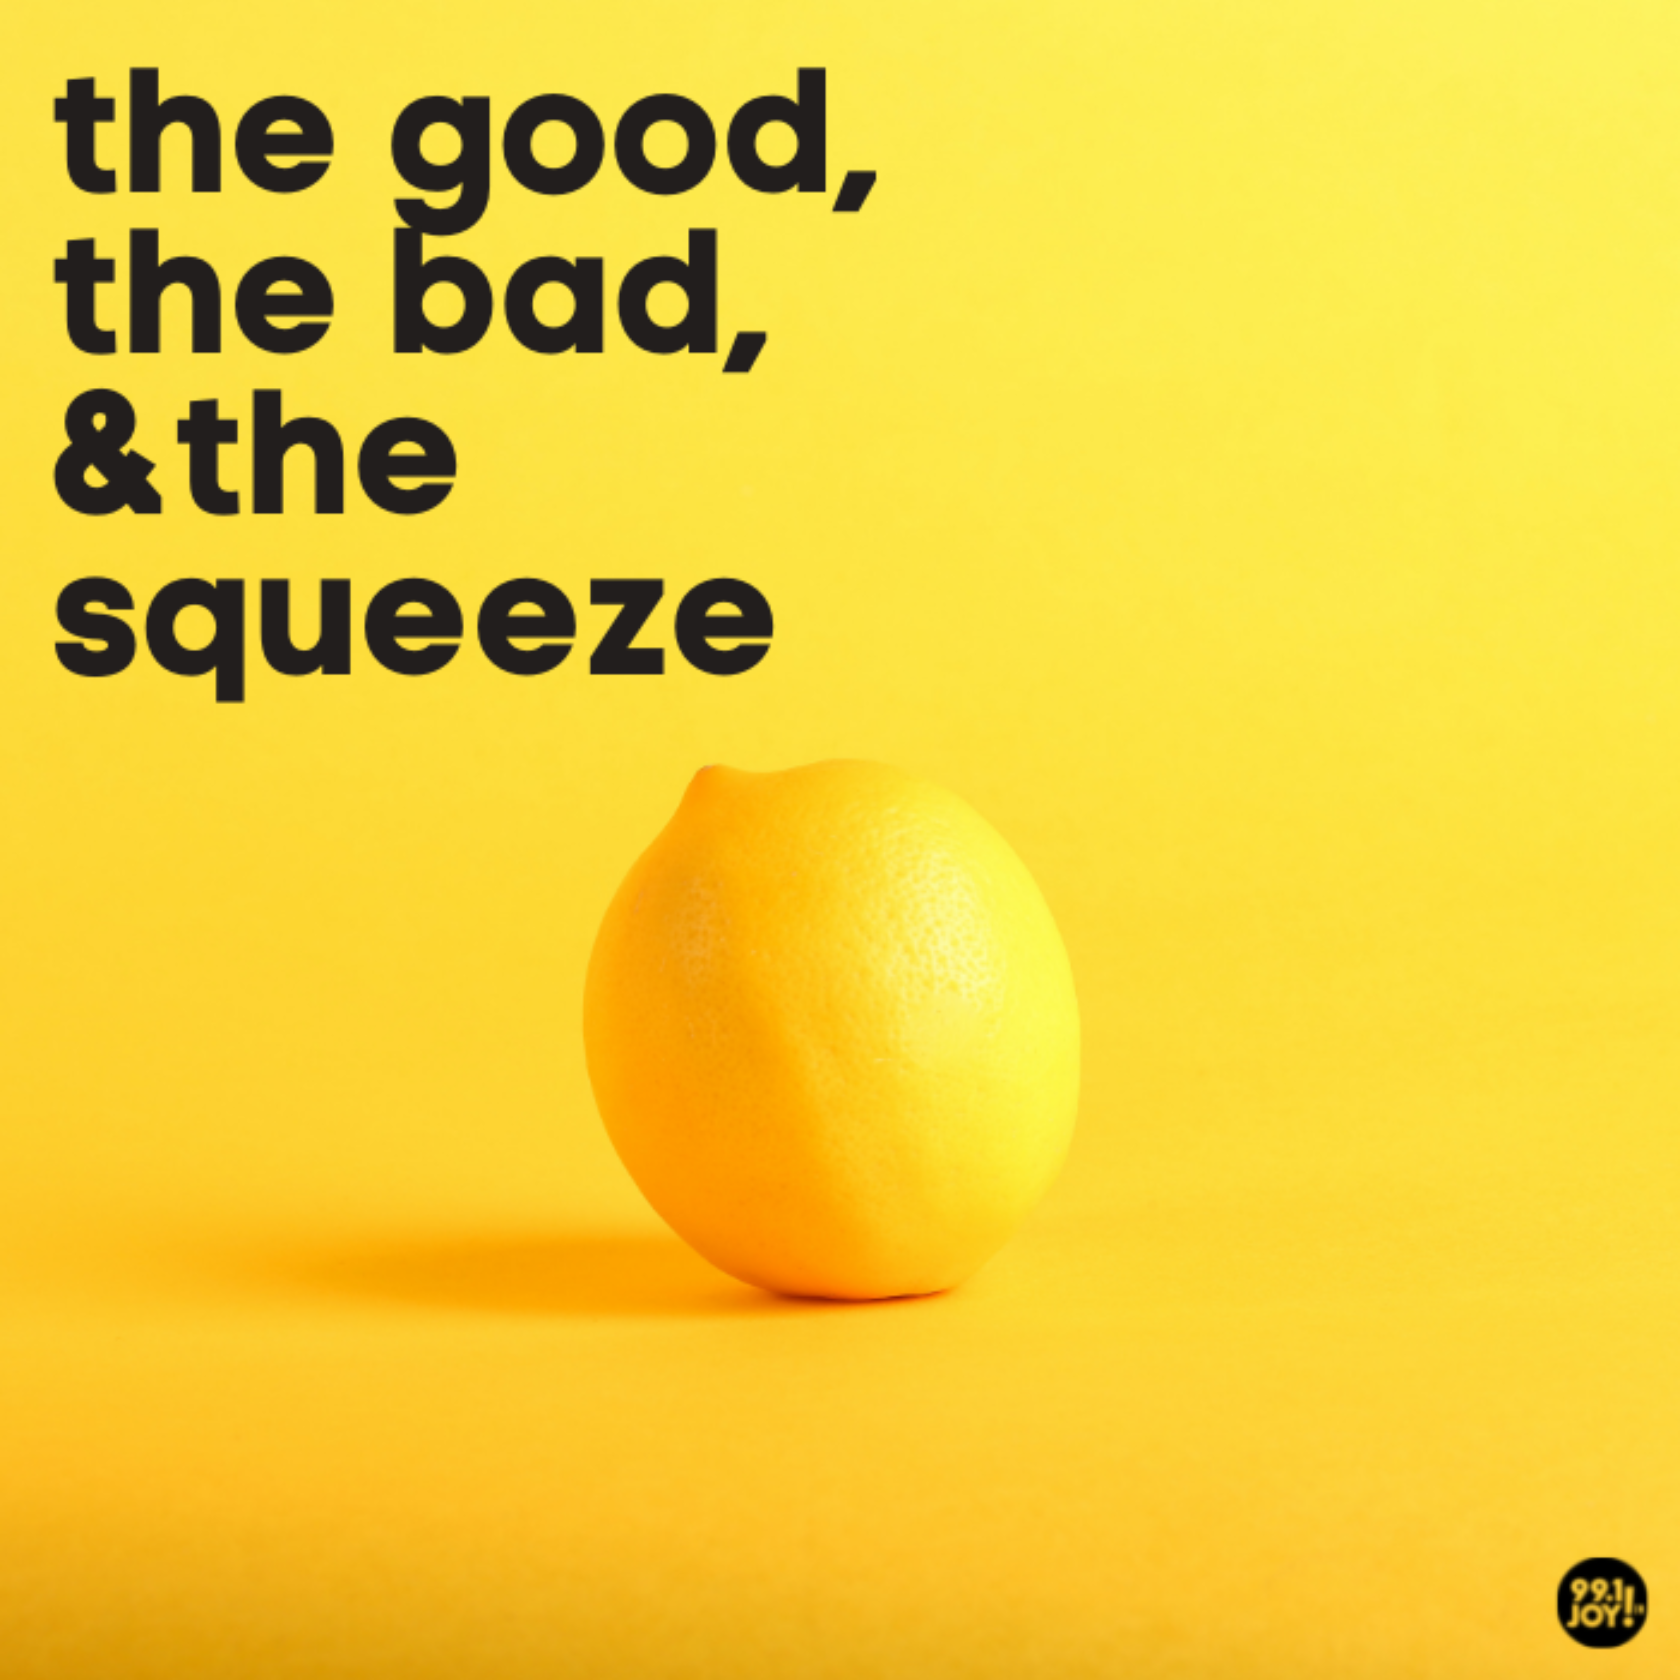 The Good, The Bad, & The Squeeze